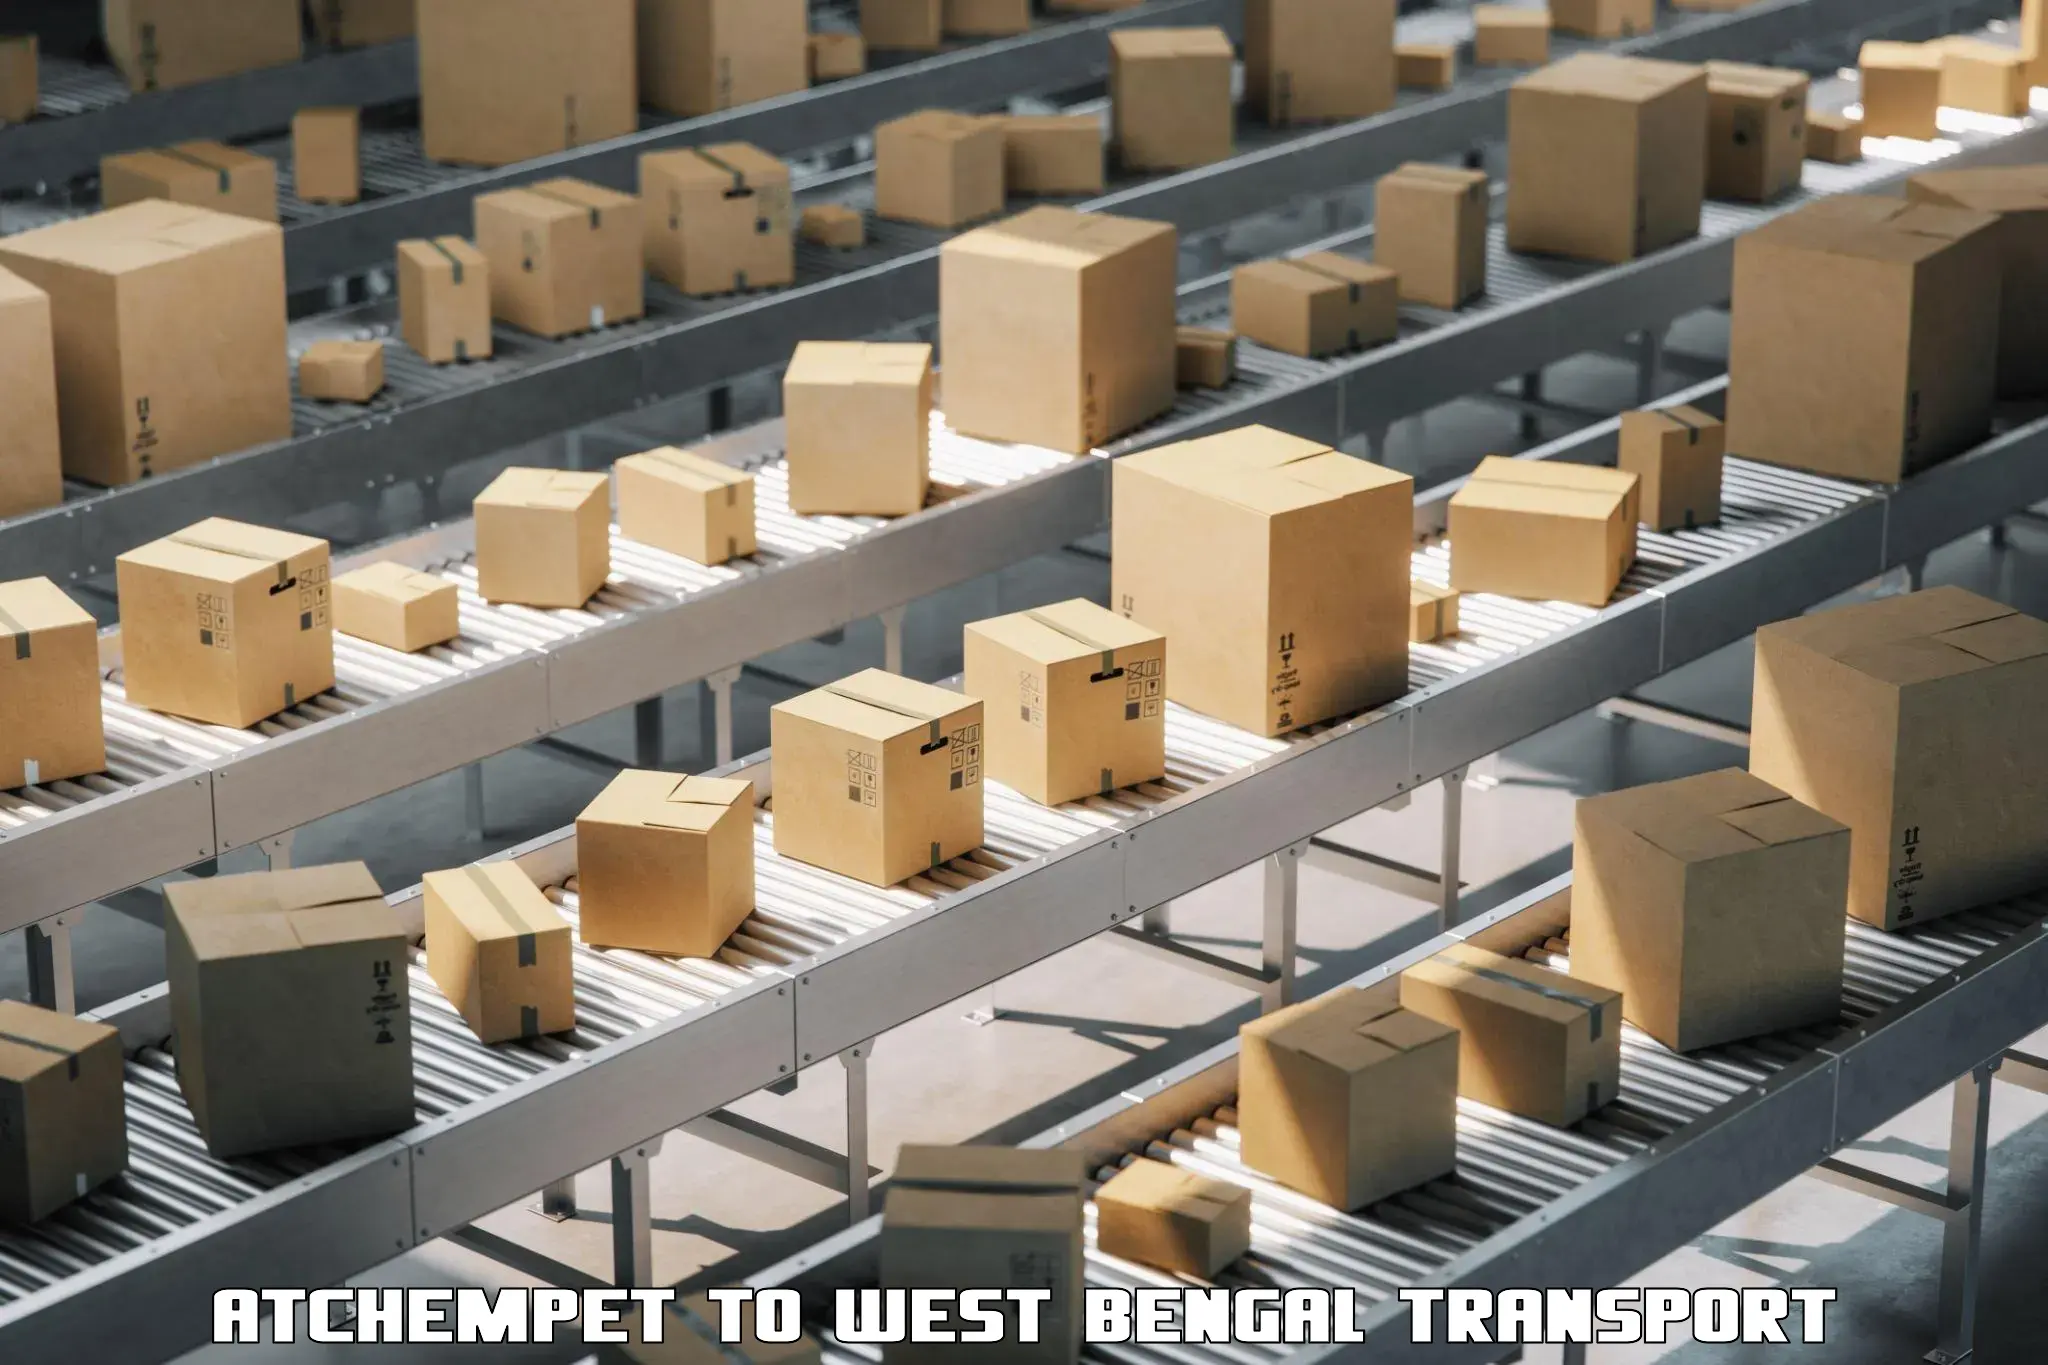 Lorry transport service Atchempet to West Bengal